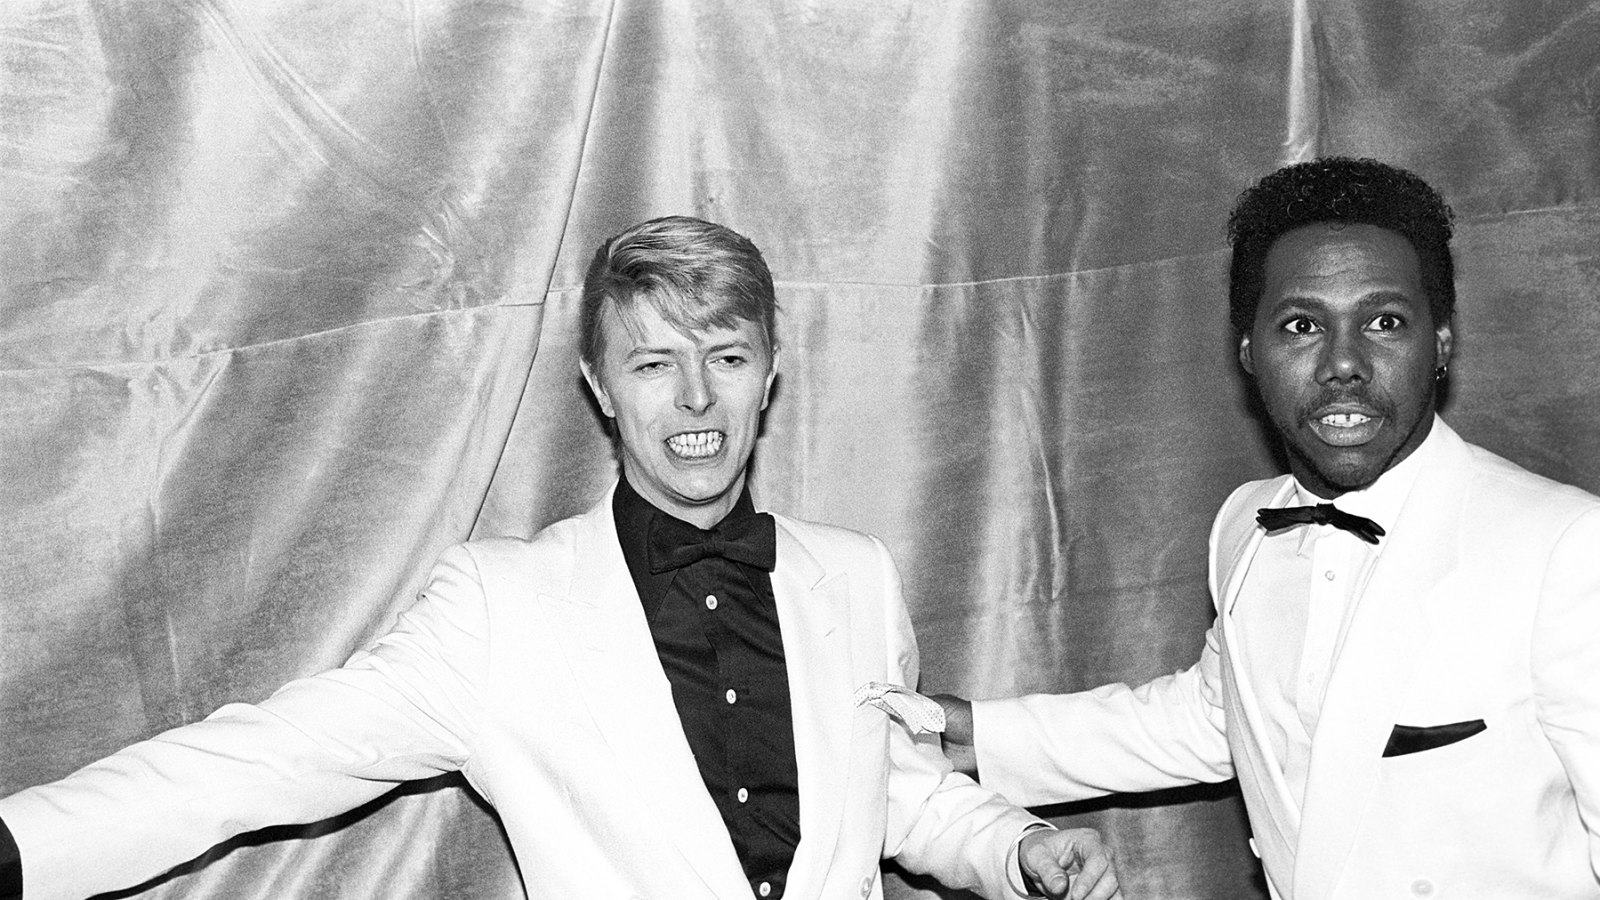 David Bowie and Nile Rodgers in 1983